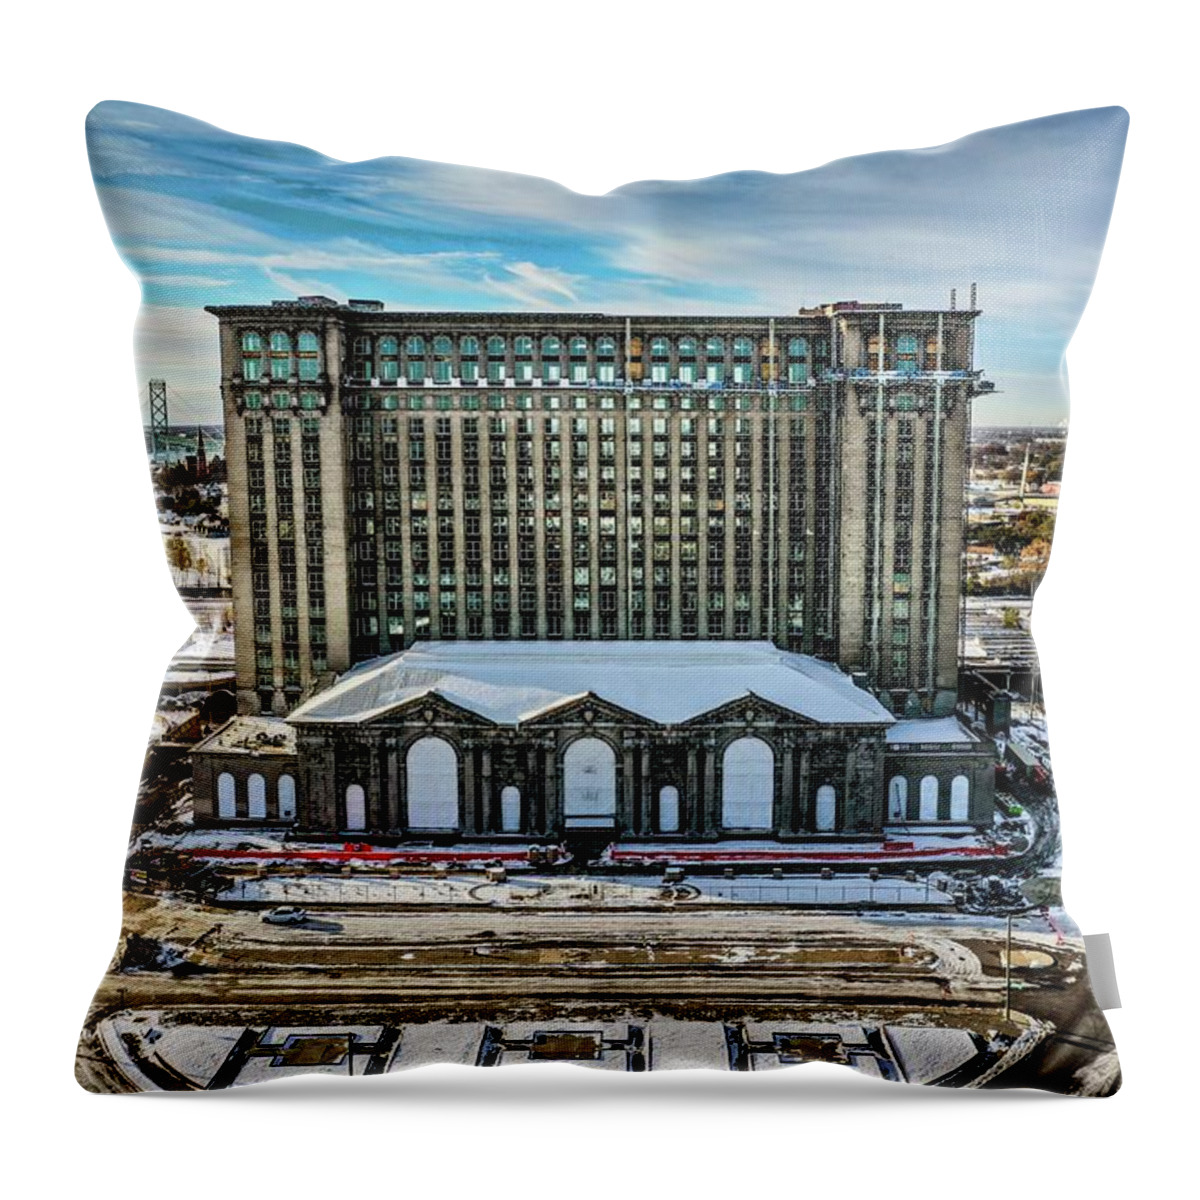 Detroit Throw Pillow featuring the photograph Grand Central DJI_0462 by Michael Thomas